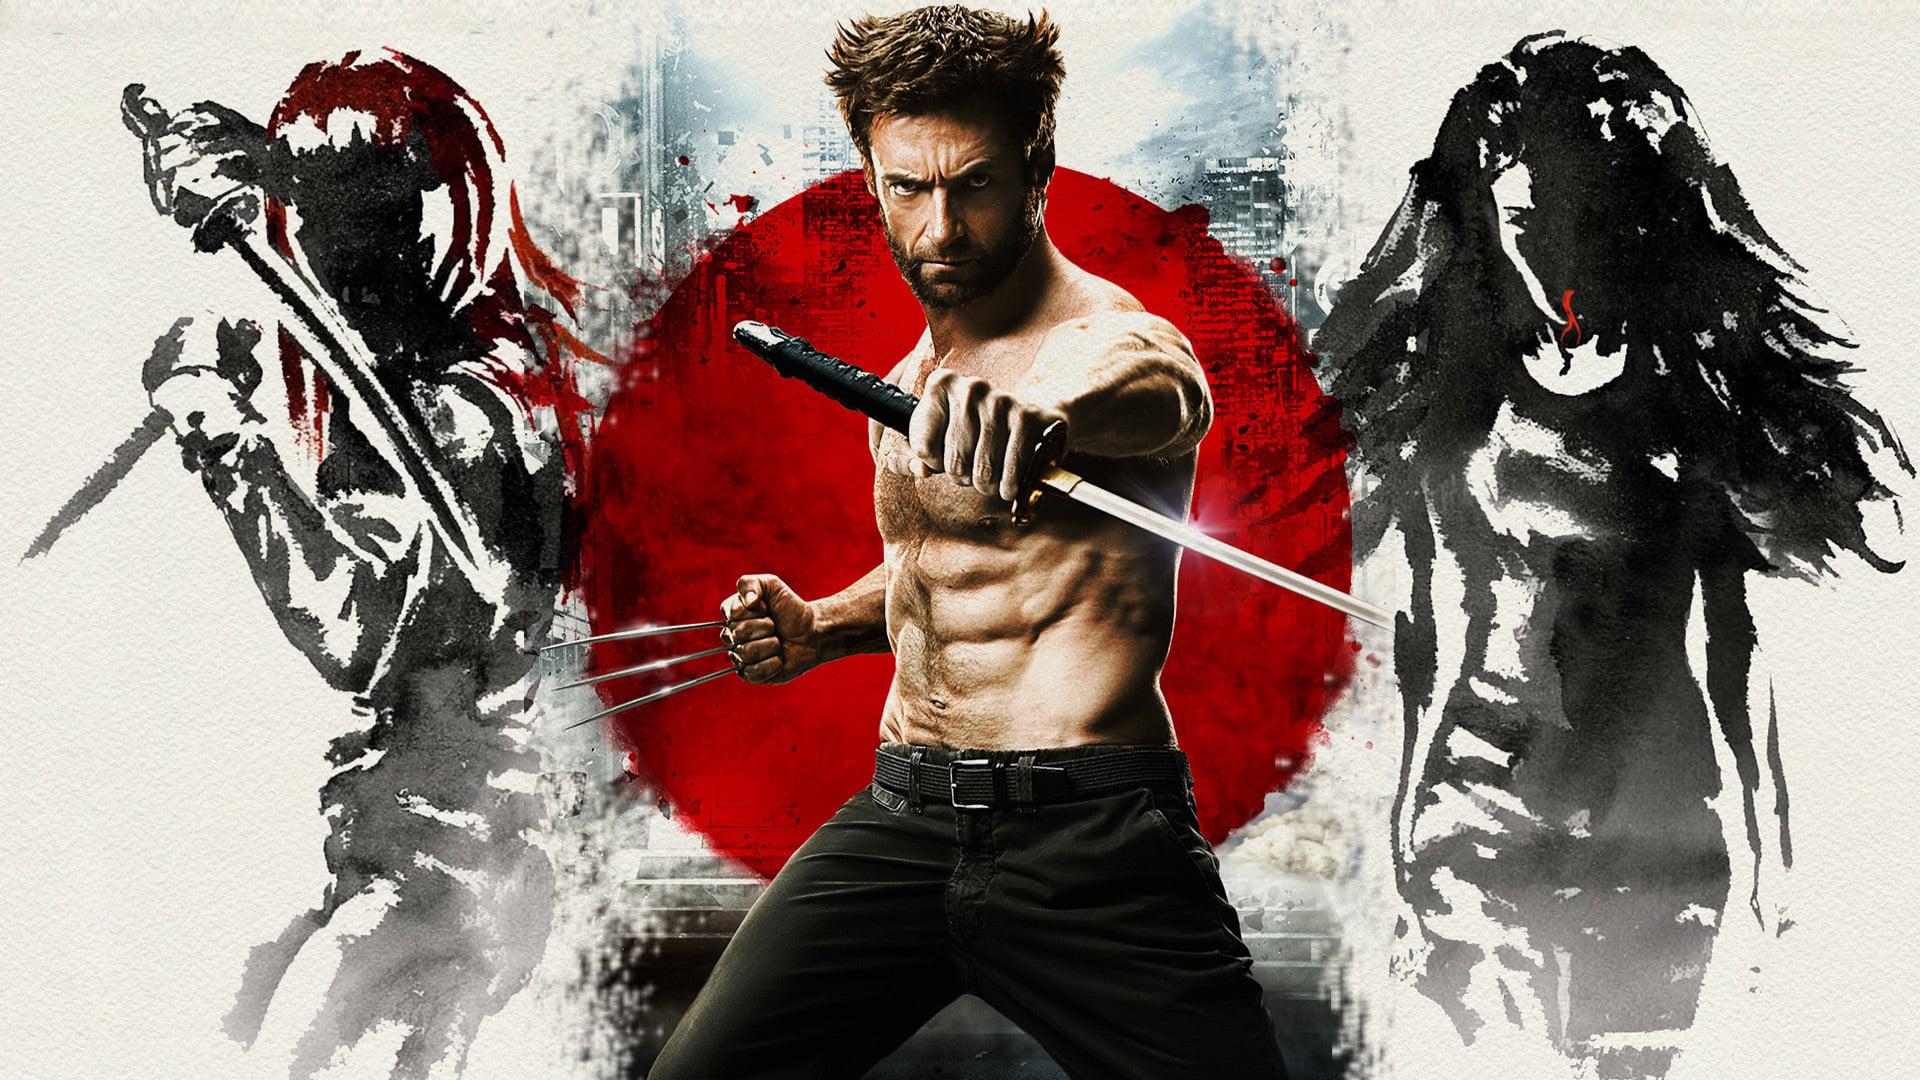 Backdrop Image for The Wolverine